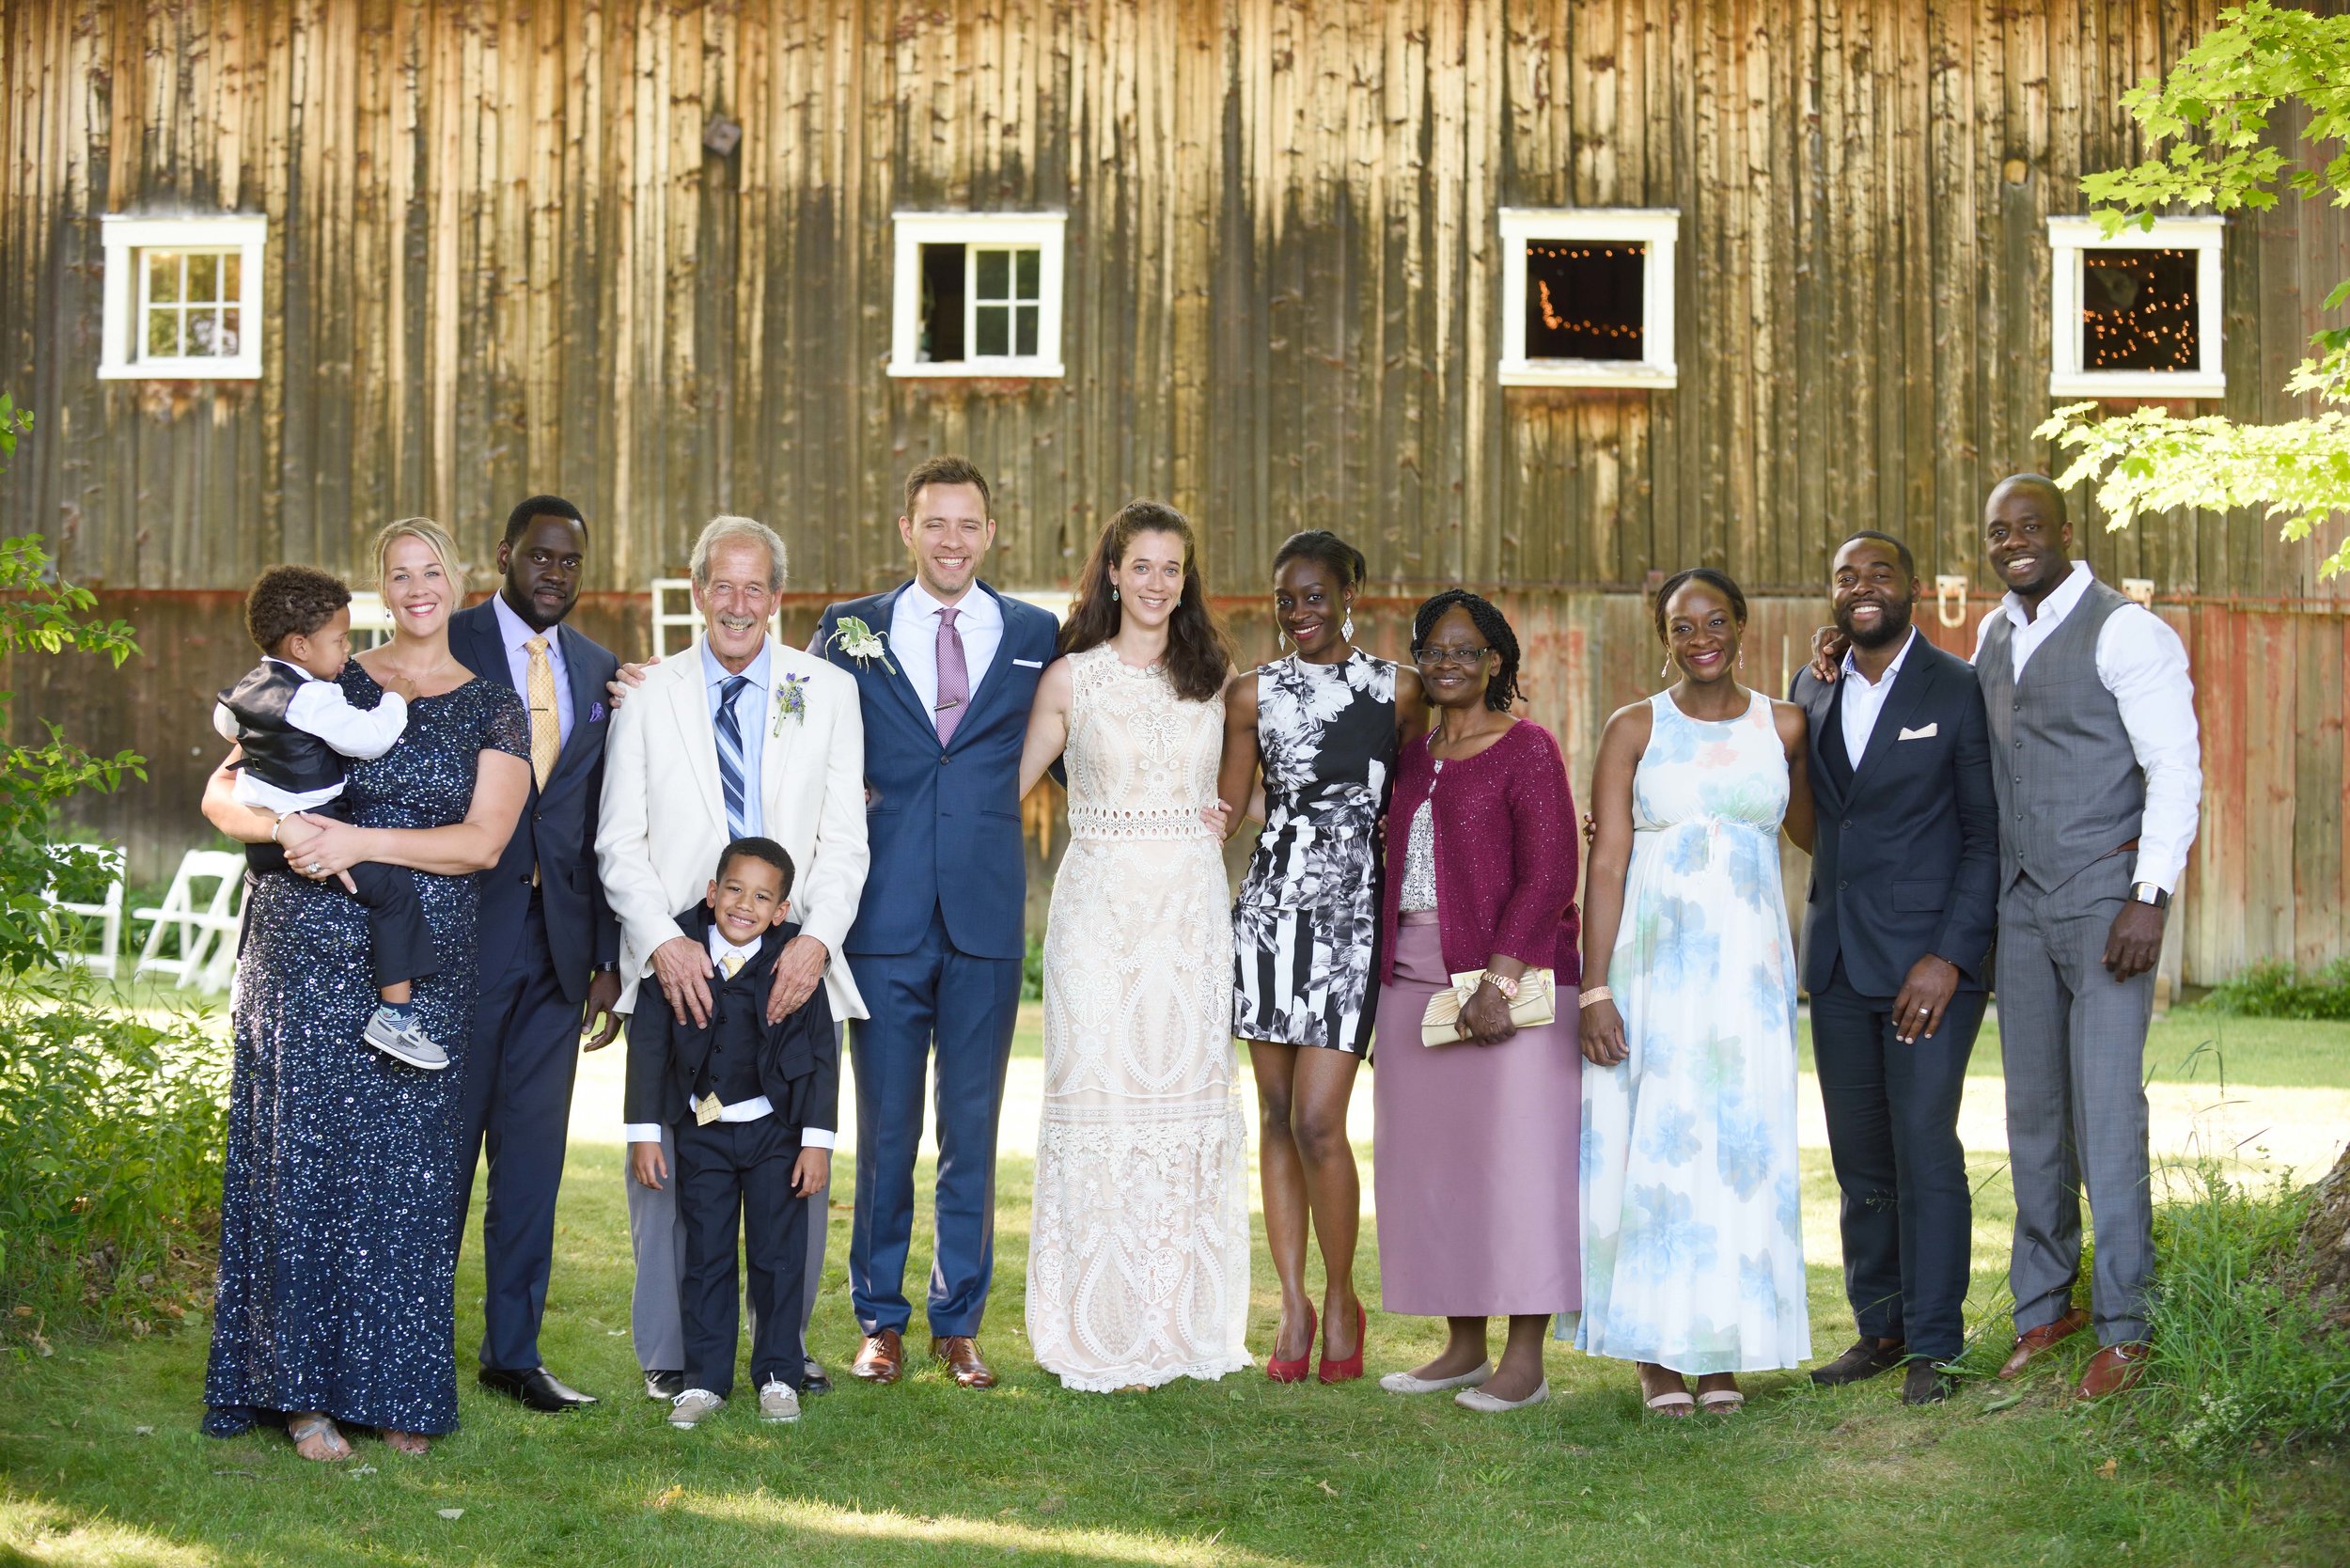 A wedding party standing in front of a rustic barn